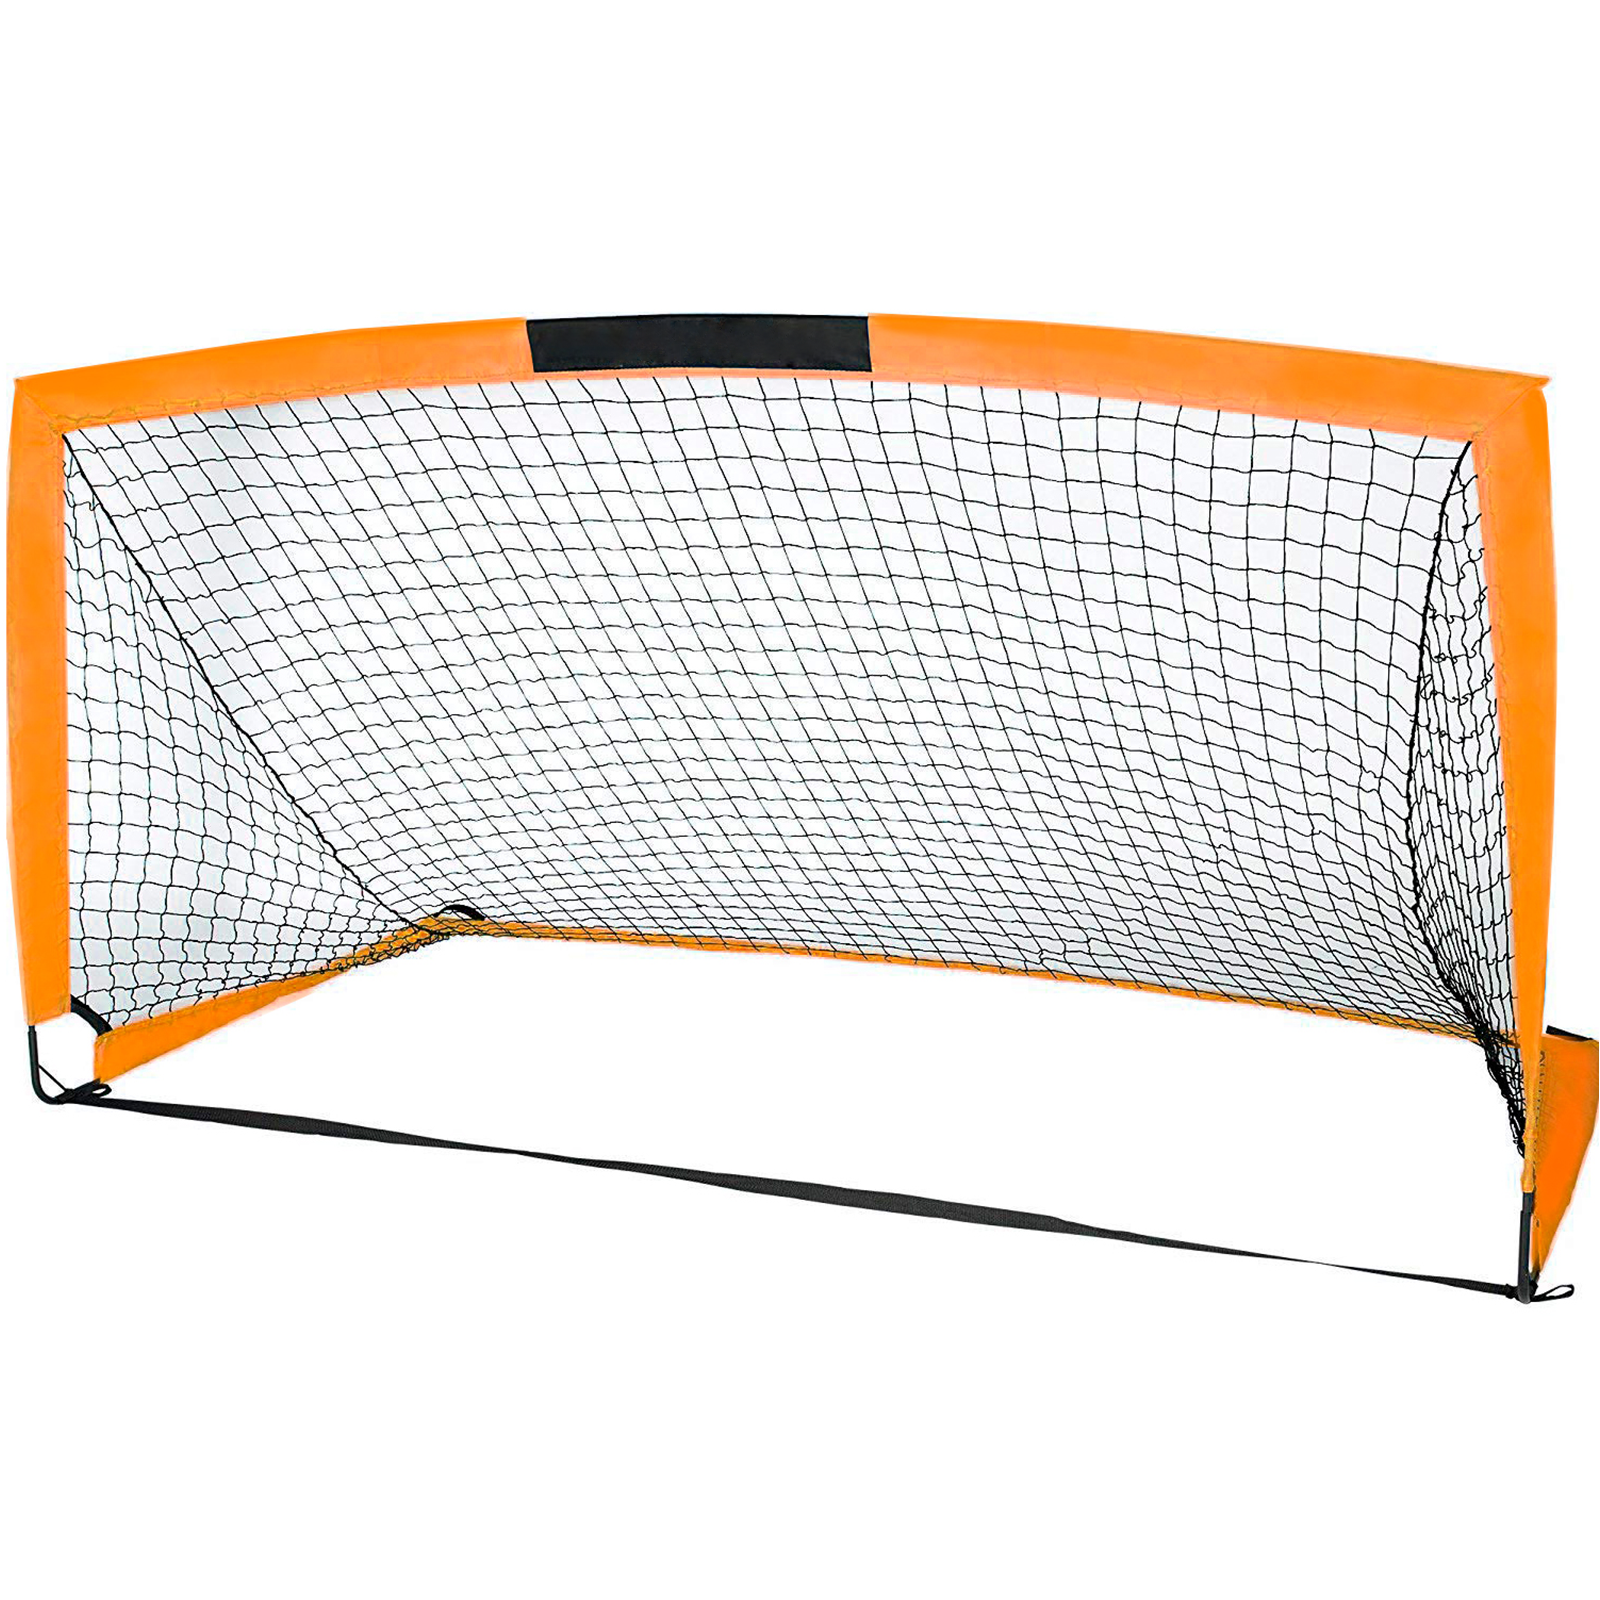 HITIK Soccer Goal 6x4 Portable Soccer Net with Carry Bag for Games and Training for Kids and Teens,Orange - image 1 of 7